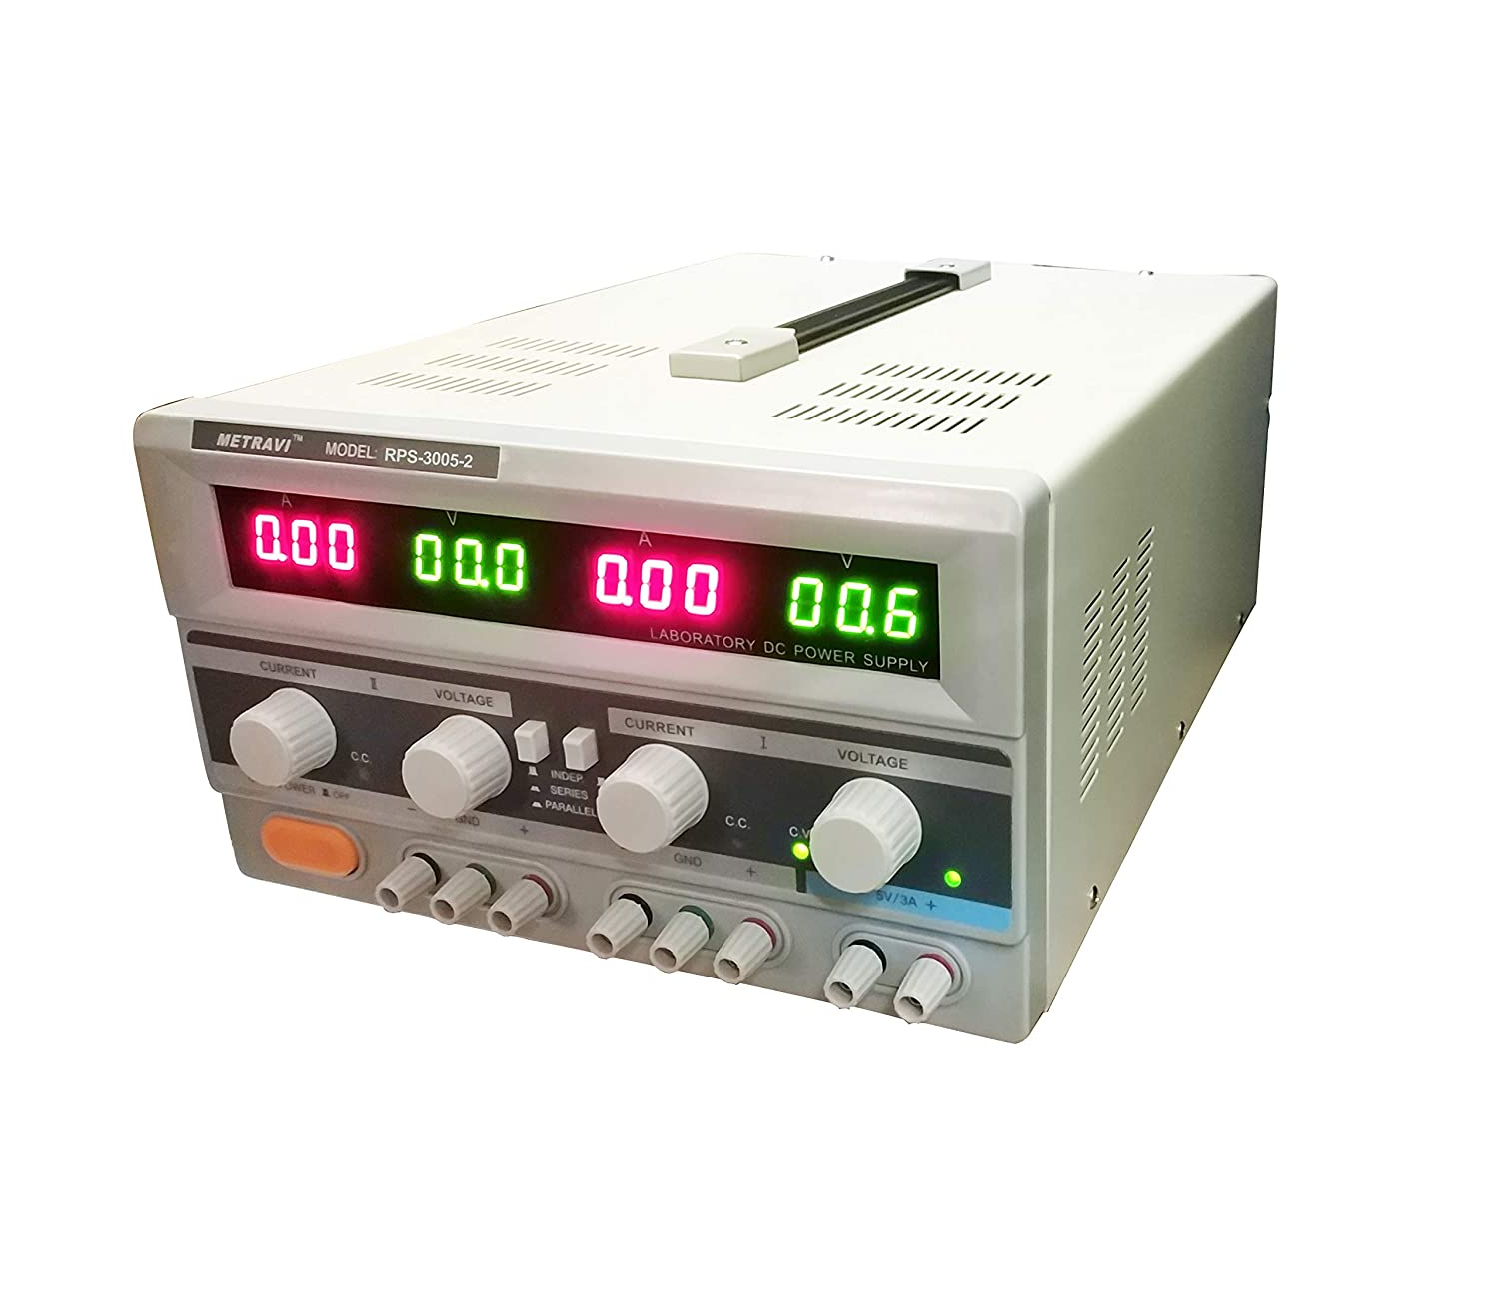 Metravi RPS-3005-2 DC Regulated Power Supply - Dual Output with Backlit LCD Display of Variable 0-30V / 0-5A DC